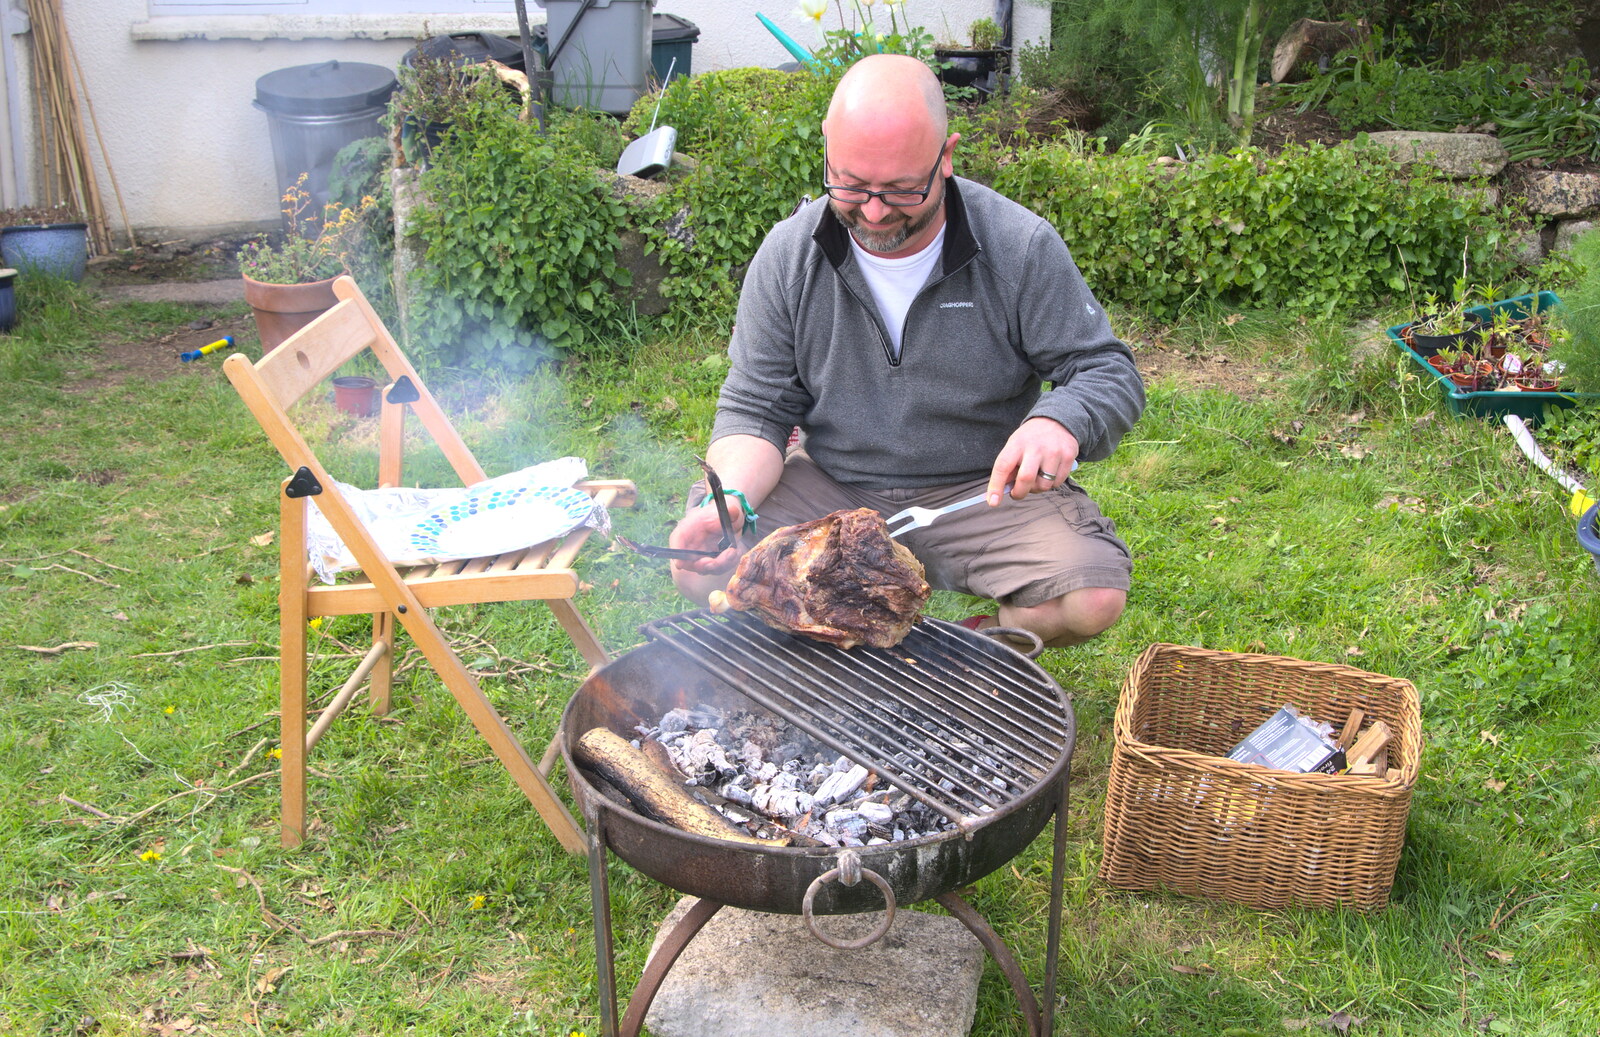 Matt sticks a massive lump of lamb on the fire from A Barbeque, Grimspound and Pizza, Dartmoor and Exeter, Devon - 15th April 2017